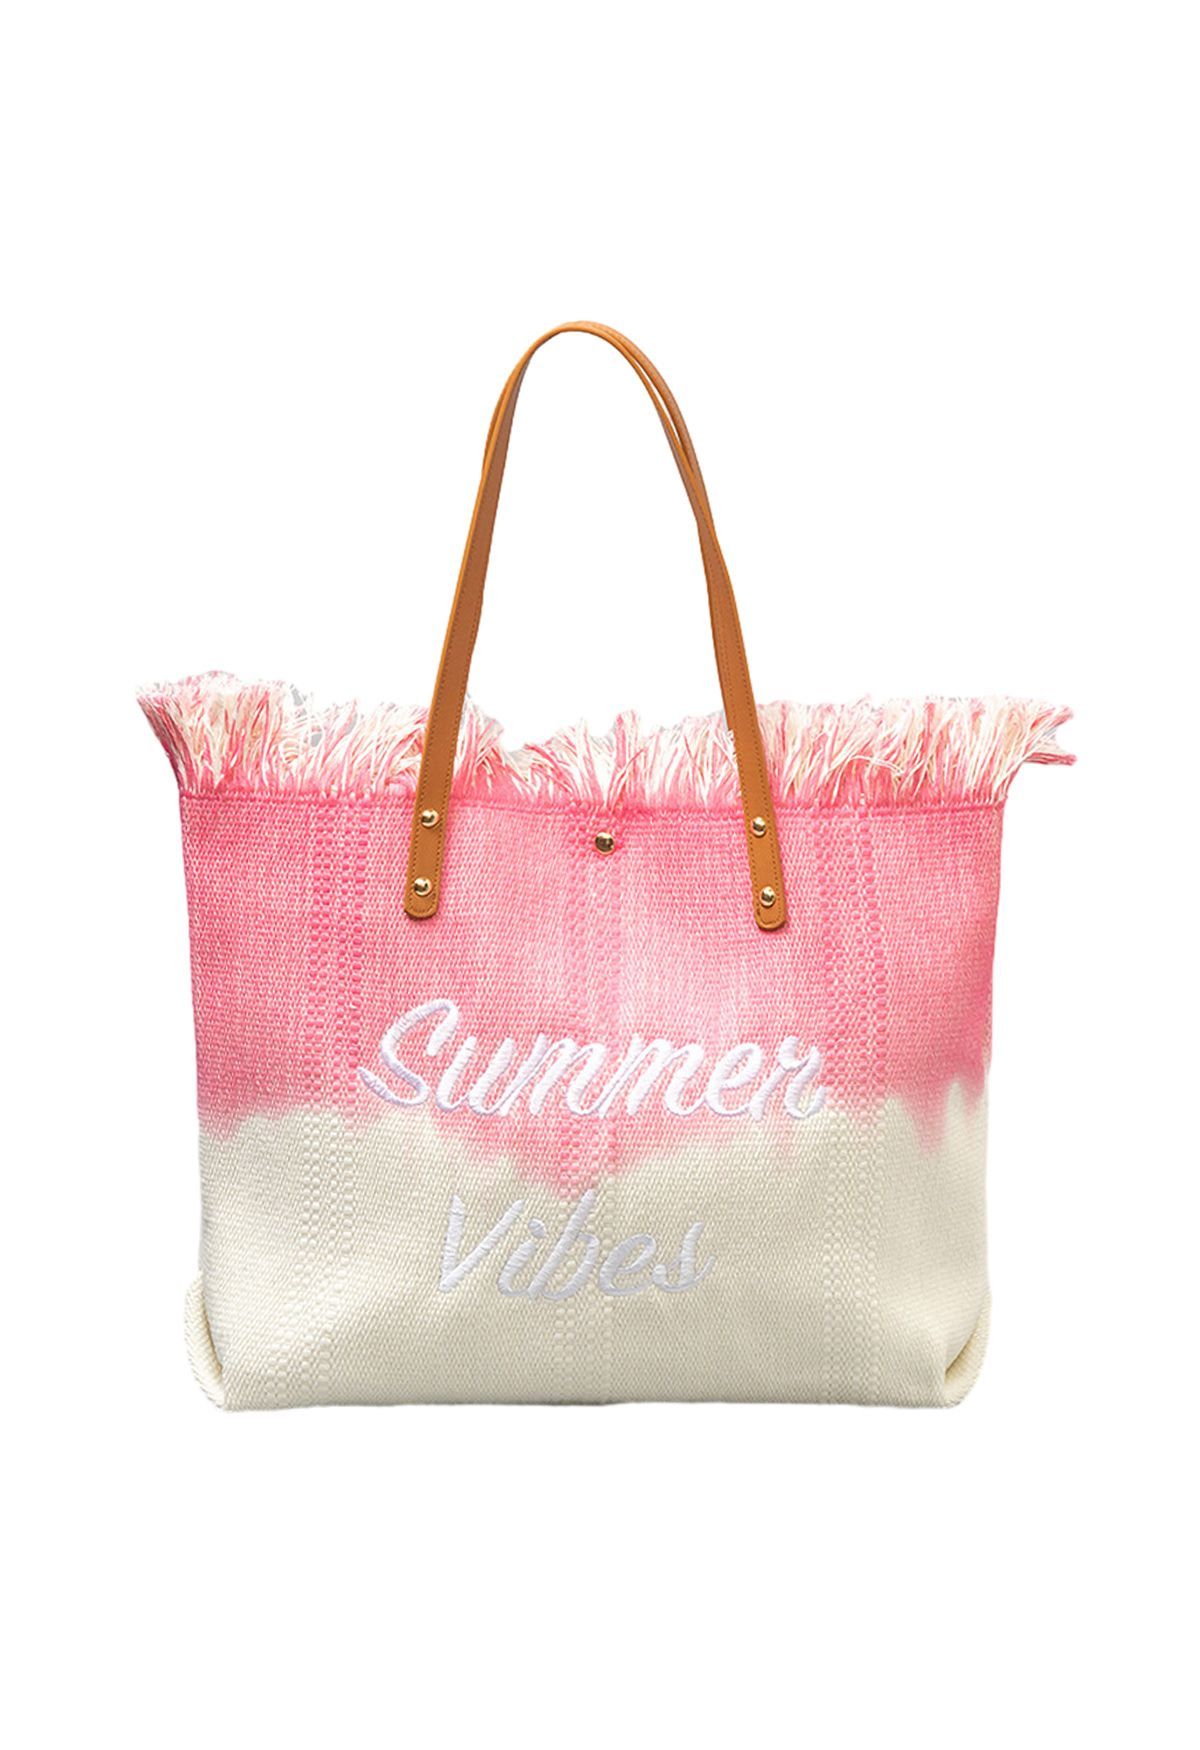 Summer Vibes Two-Tone Canvas Tote Bag in Pink - Retro, Indie and Unique  Fashion